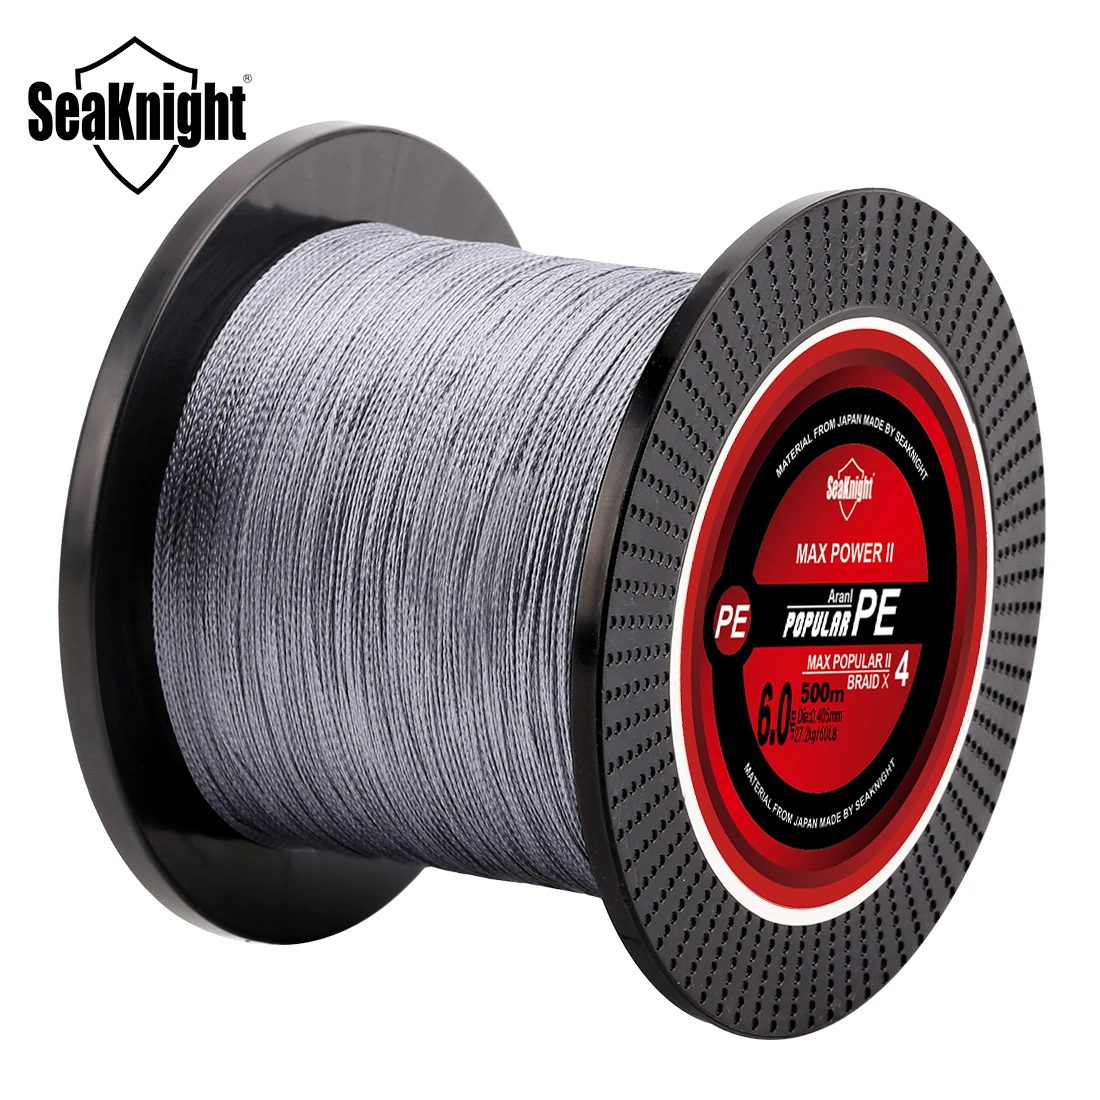 SeaKnight Brand TP Series 500M 1000M Fishing Line 8-60LB Braided Line Smooth Multifilament PE Fishing Line for Saltwater Fishing images - 6